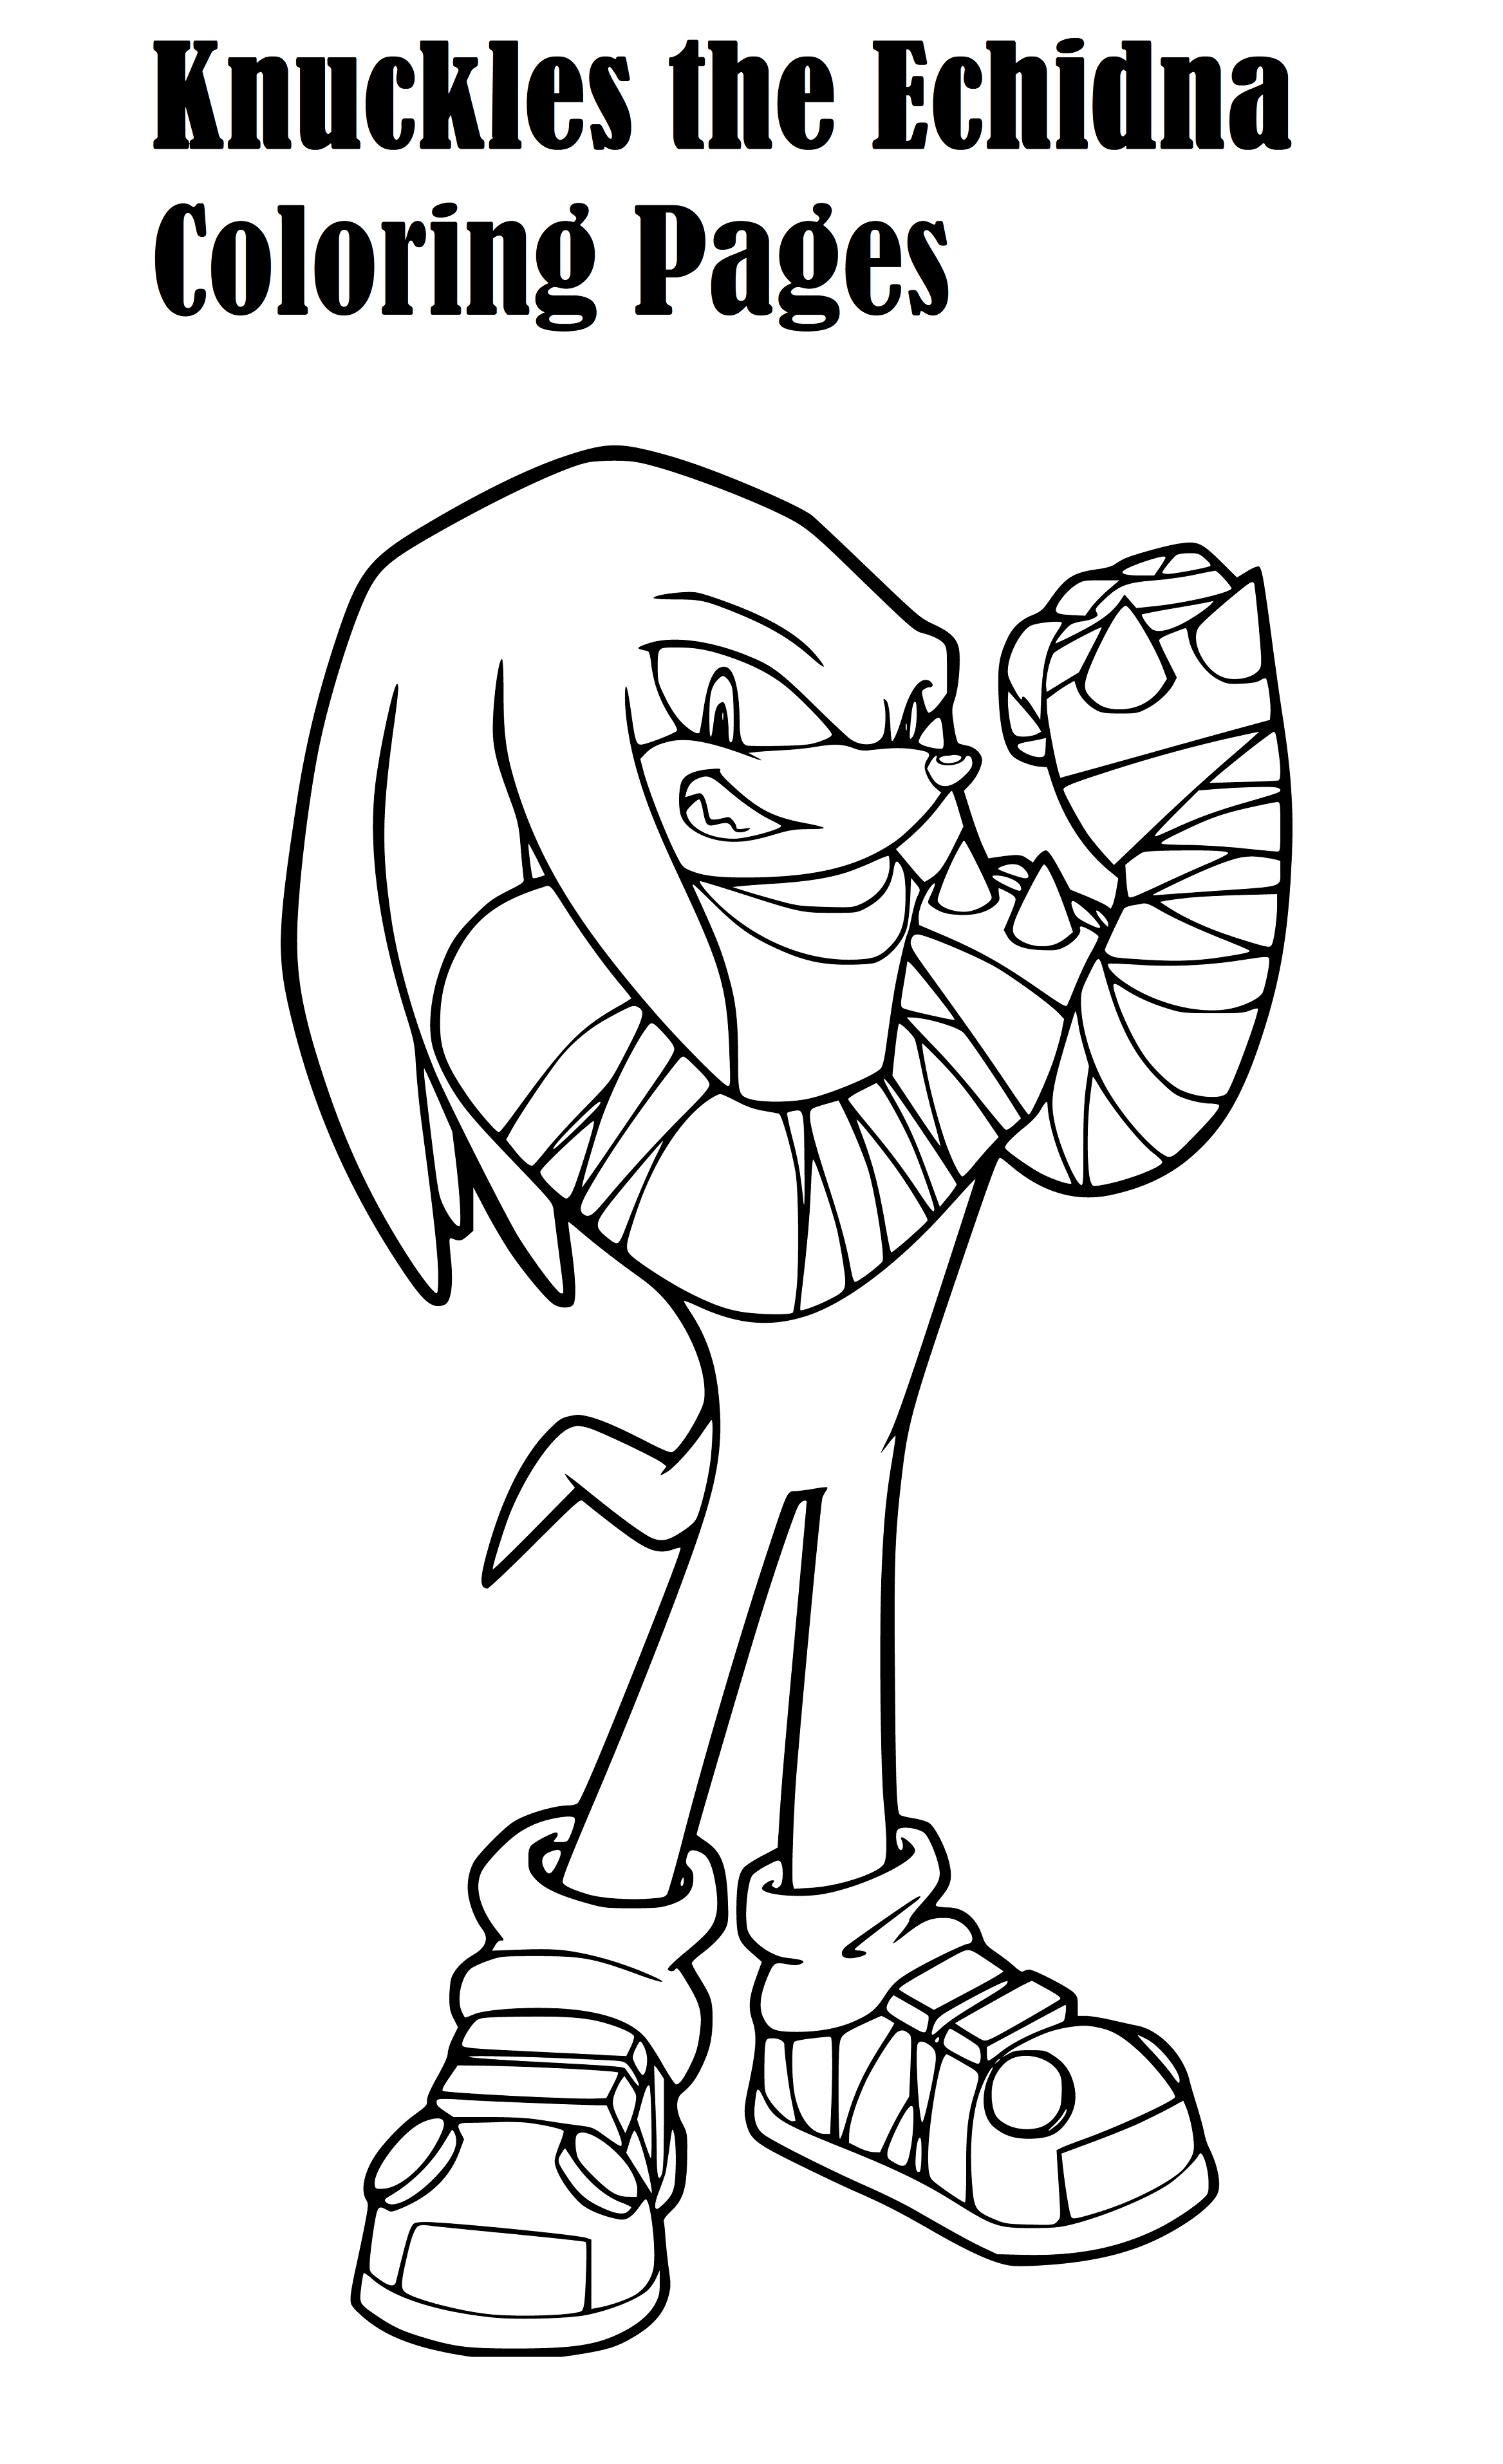 Sonic Knuckles Coloring Page Printable for Kids, Free, Simple and Easy, as PDF